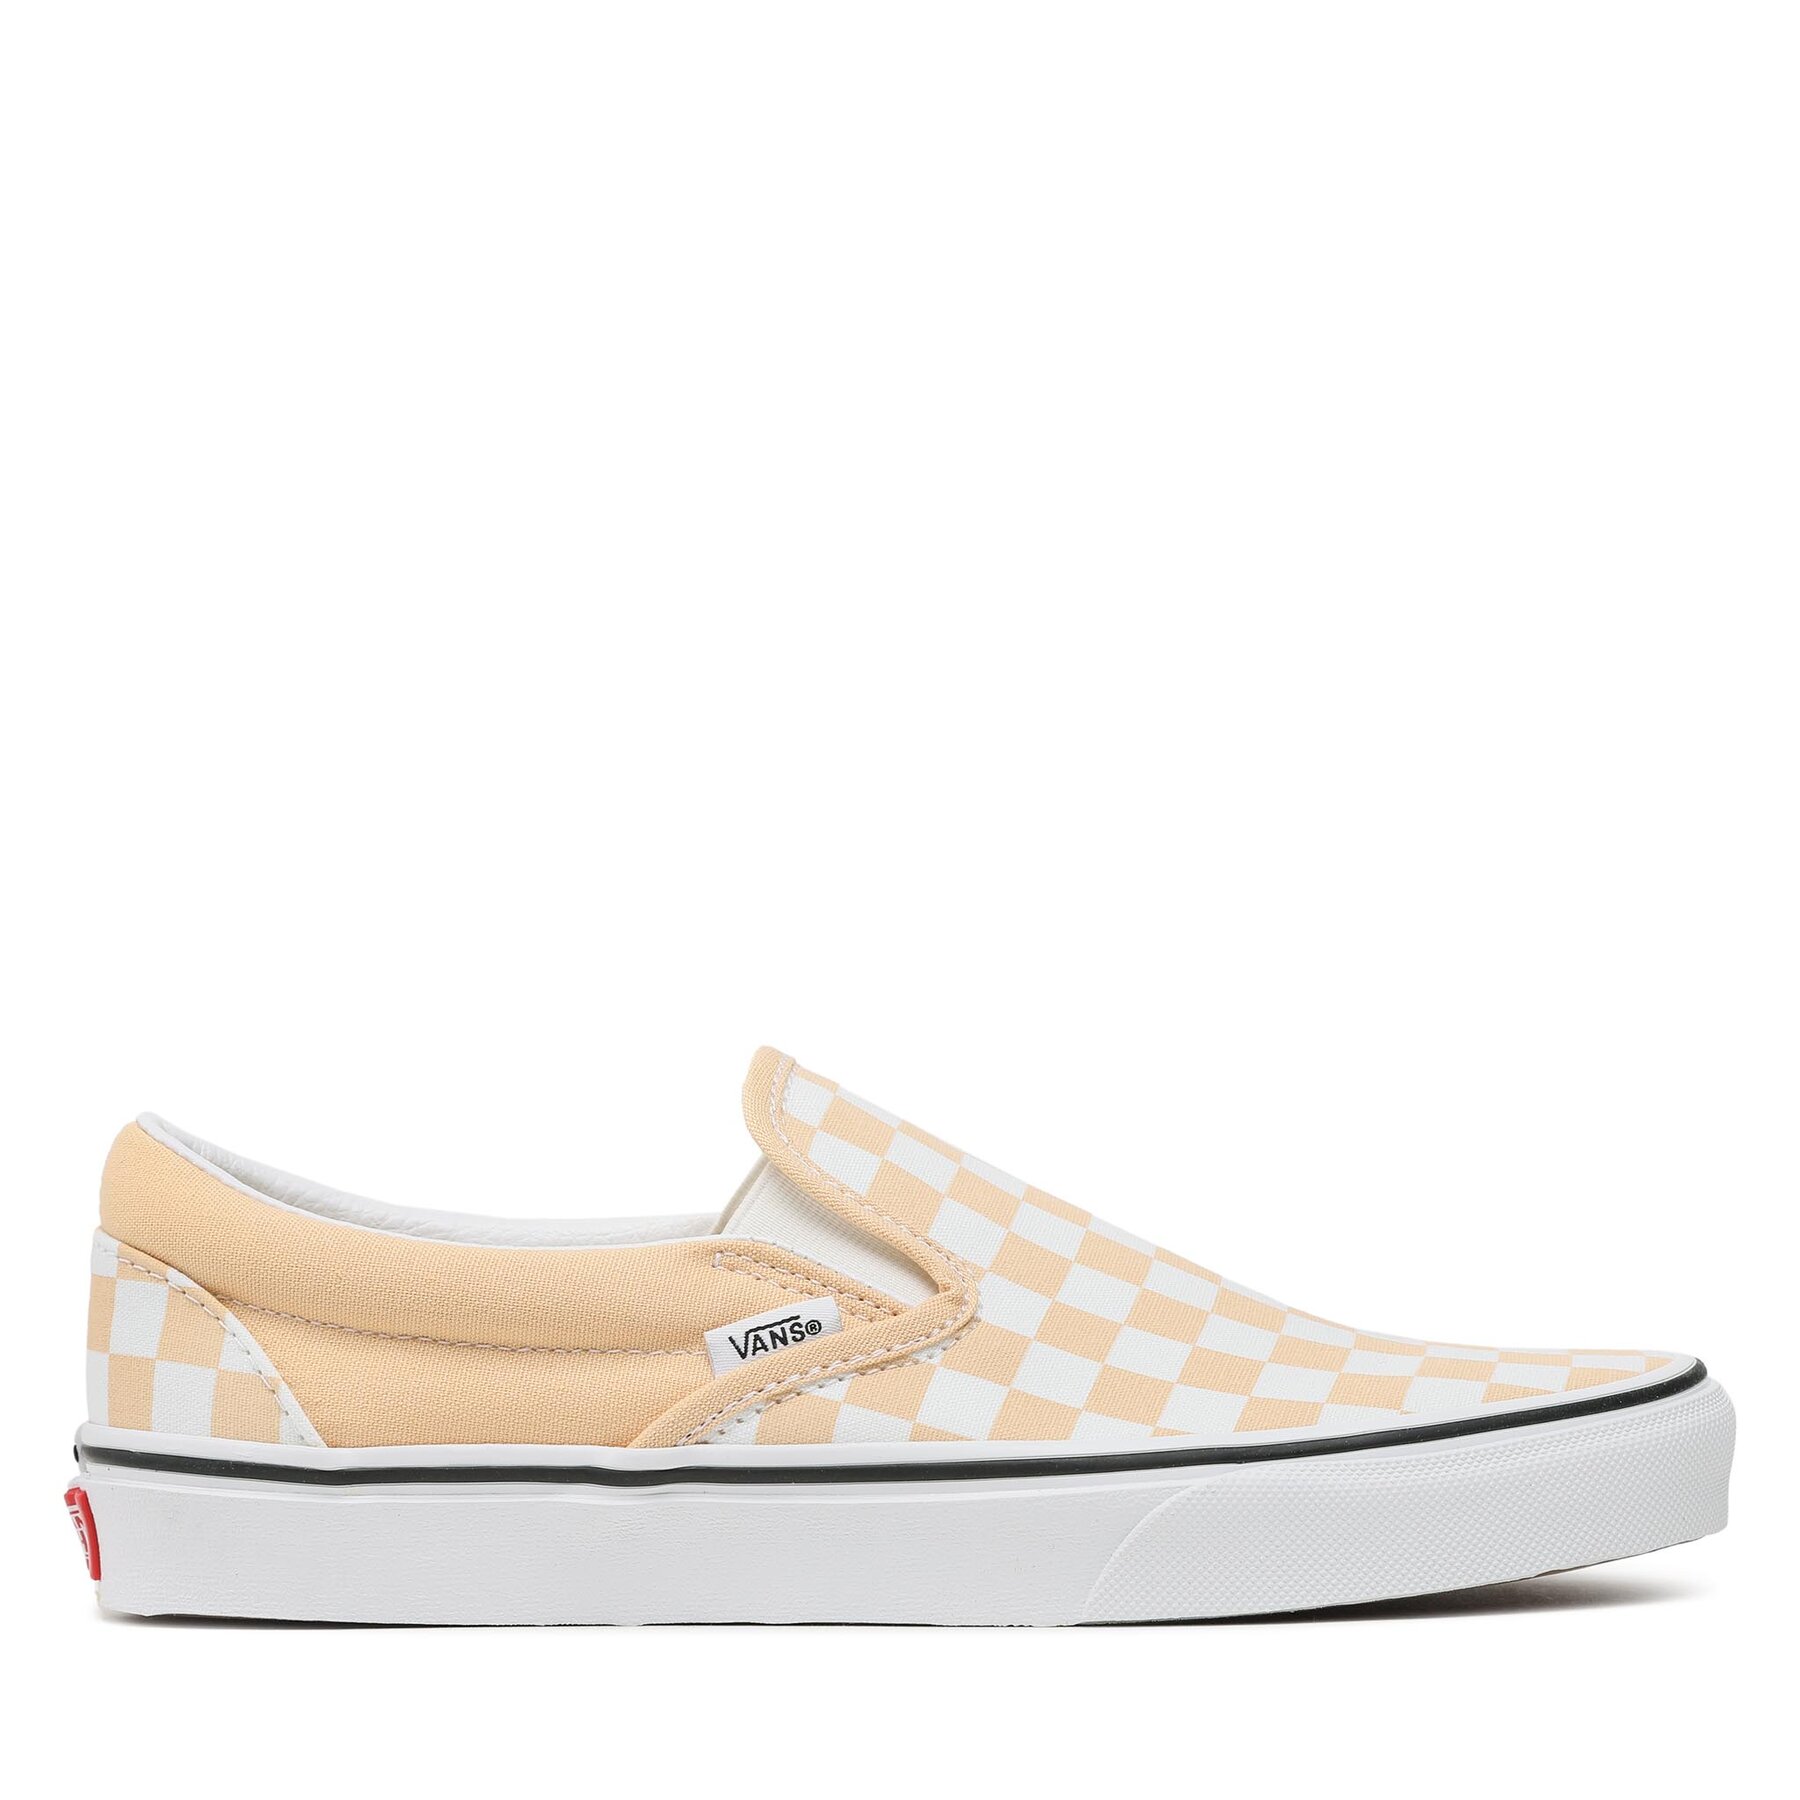 Sneakers aus Stoff Vans Classics Slip-On VN0A7Q5DBLP1 Color Theory Checkerboard von Vans